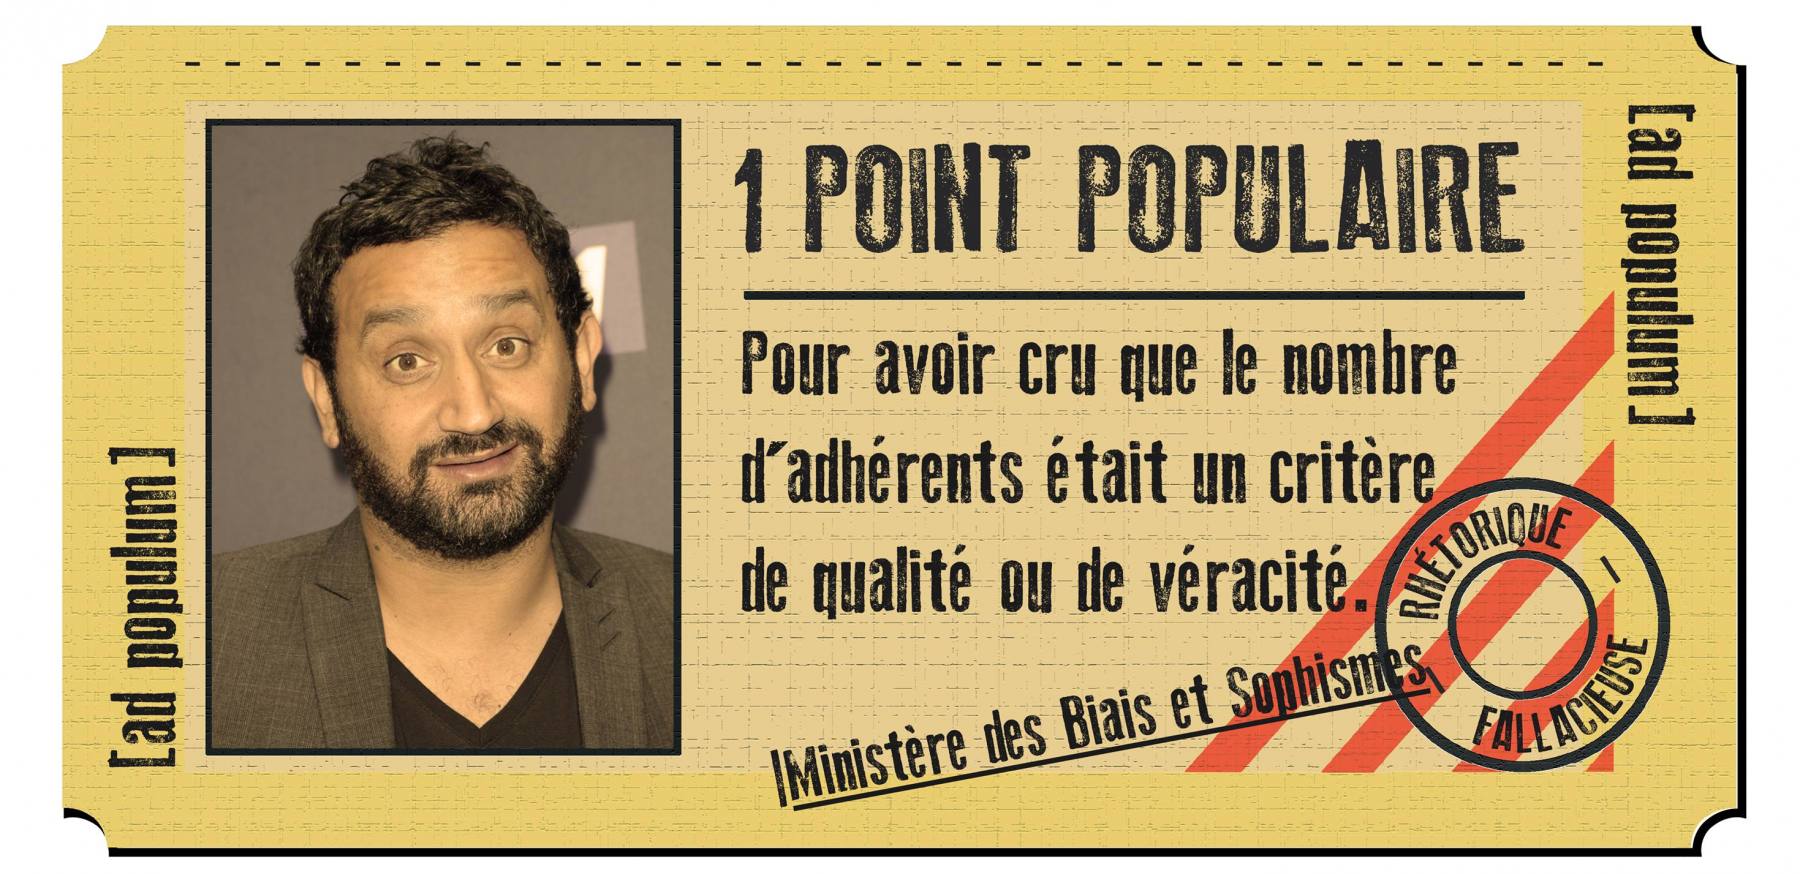 ![...](http://img.ikilote.net/img/1_point_populaire.jpg =x100)